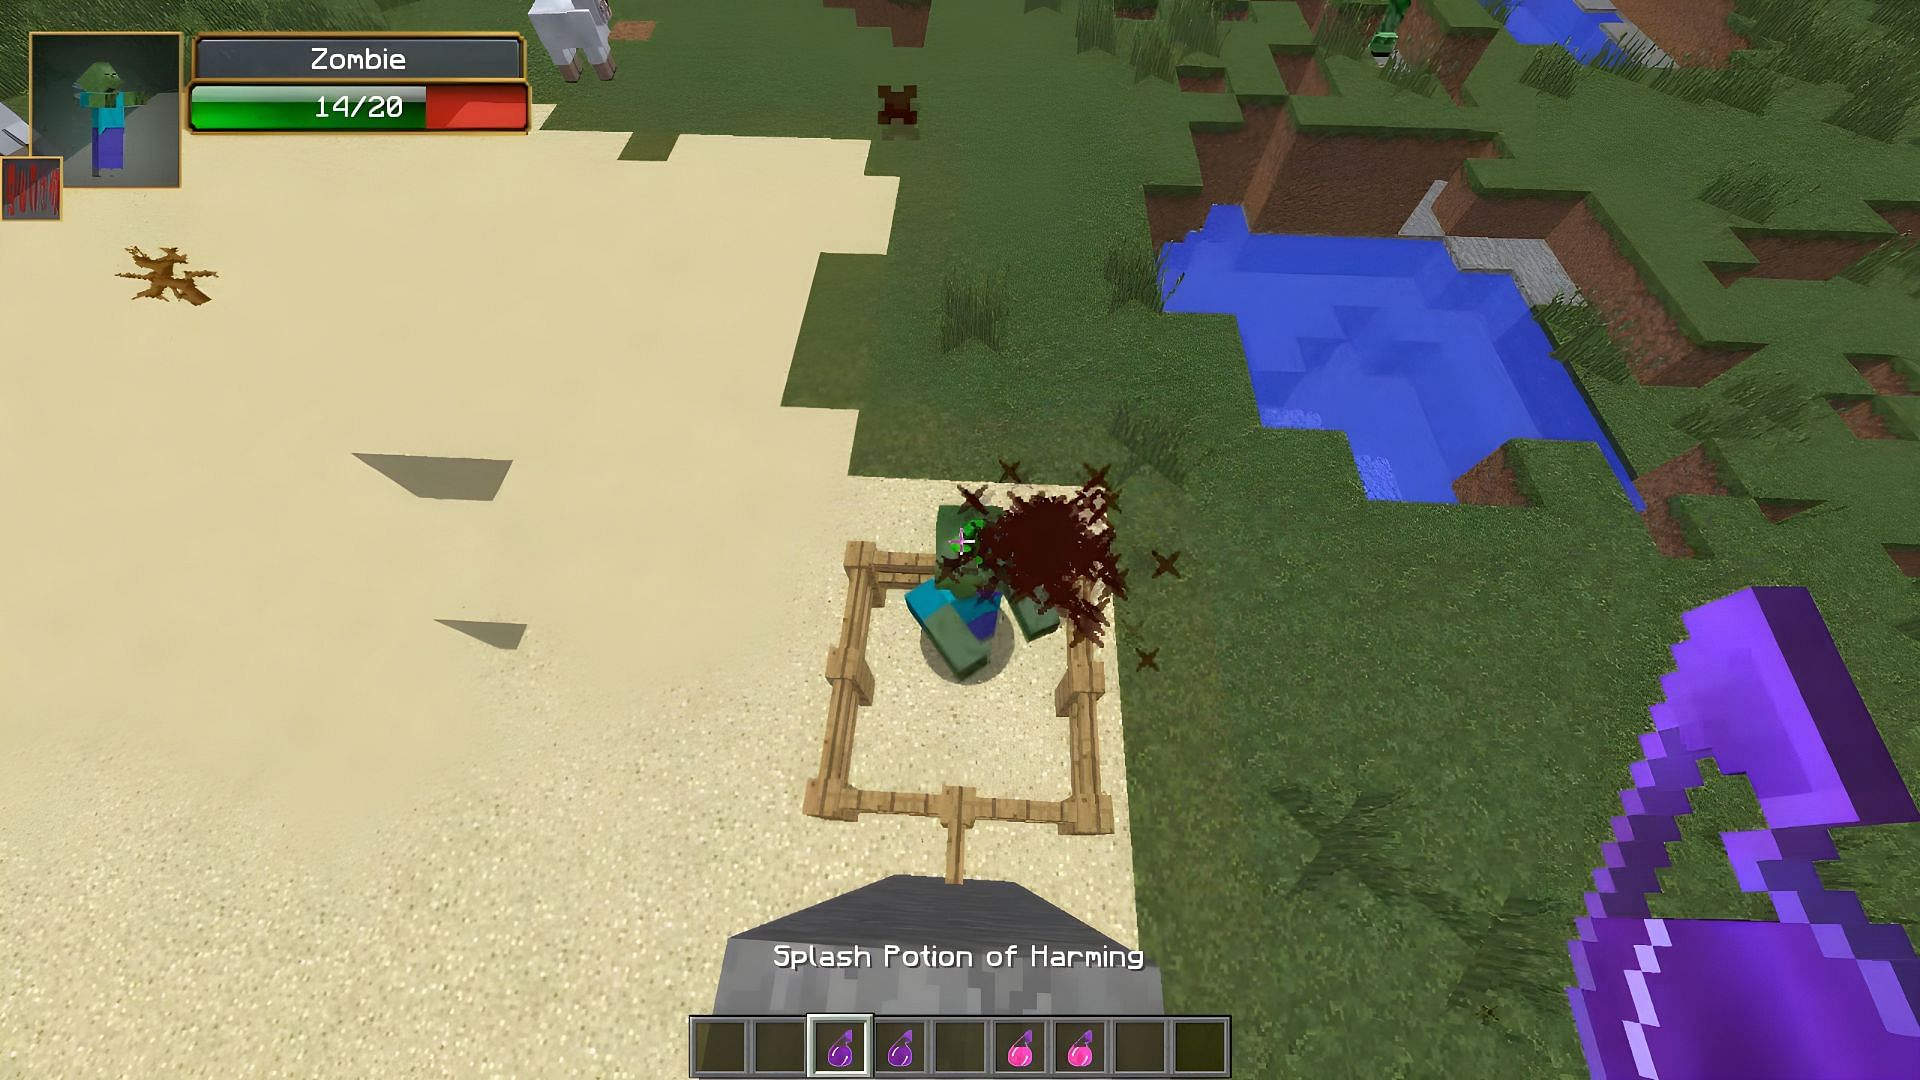 Using Potions On Undead Mobs (Image via Minecraft)